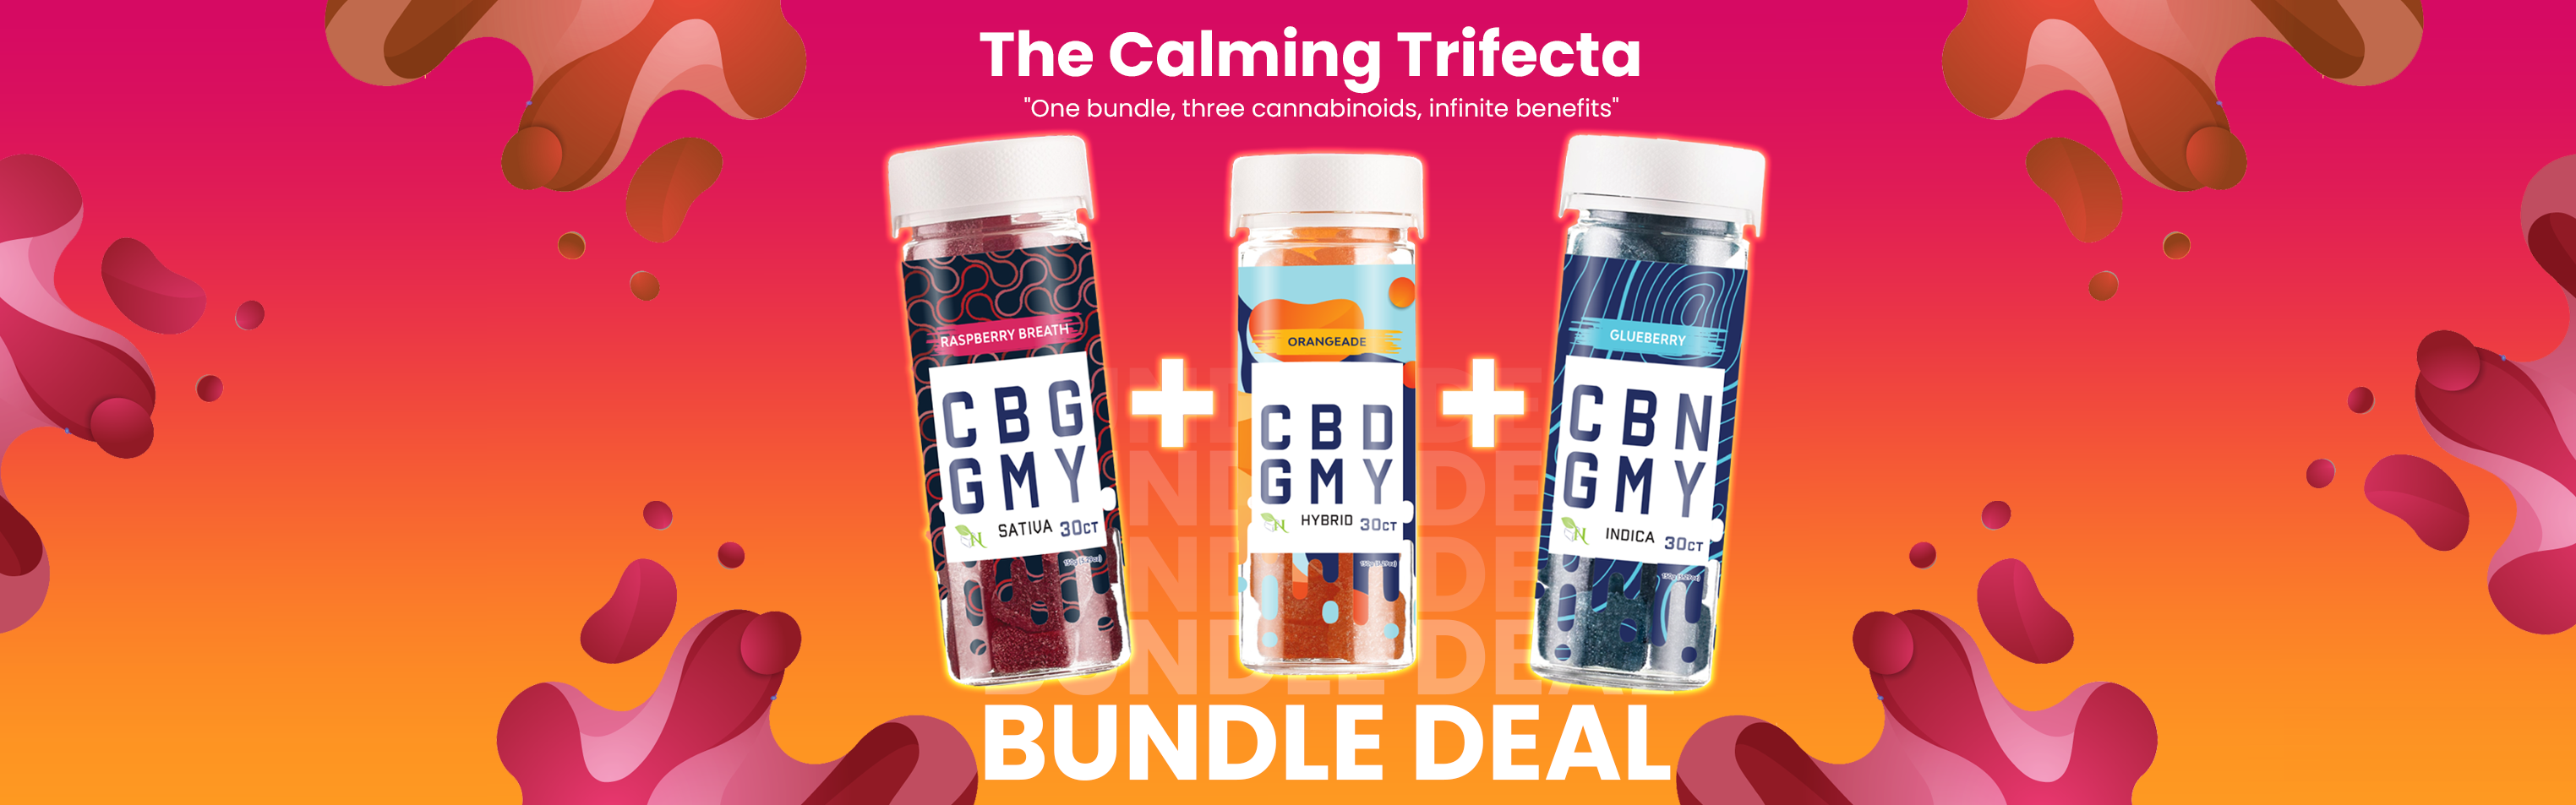 Promotional banner for The Calming Trifecta, offering a bundle deal with three labeled jars of cannabinoid gummies. Each jar represents a different variant: 'Raspberry Breath' with CBG, 'Orangenade' with CBD, and 'Glueberry' with CBN.